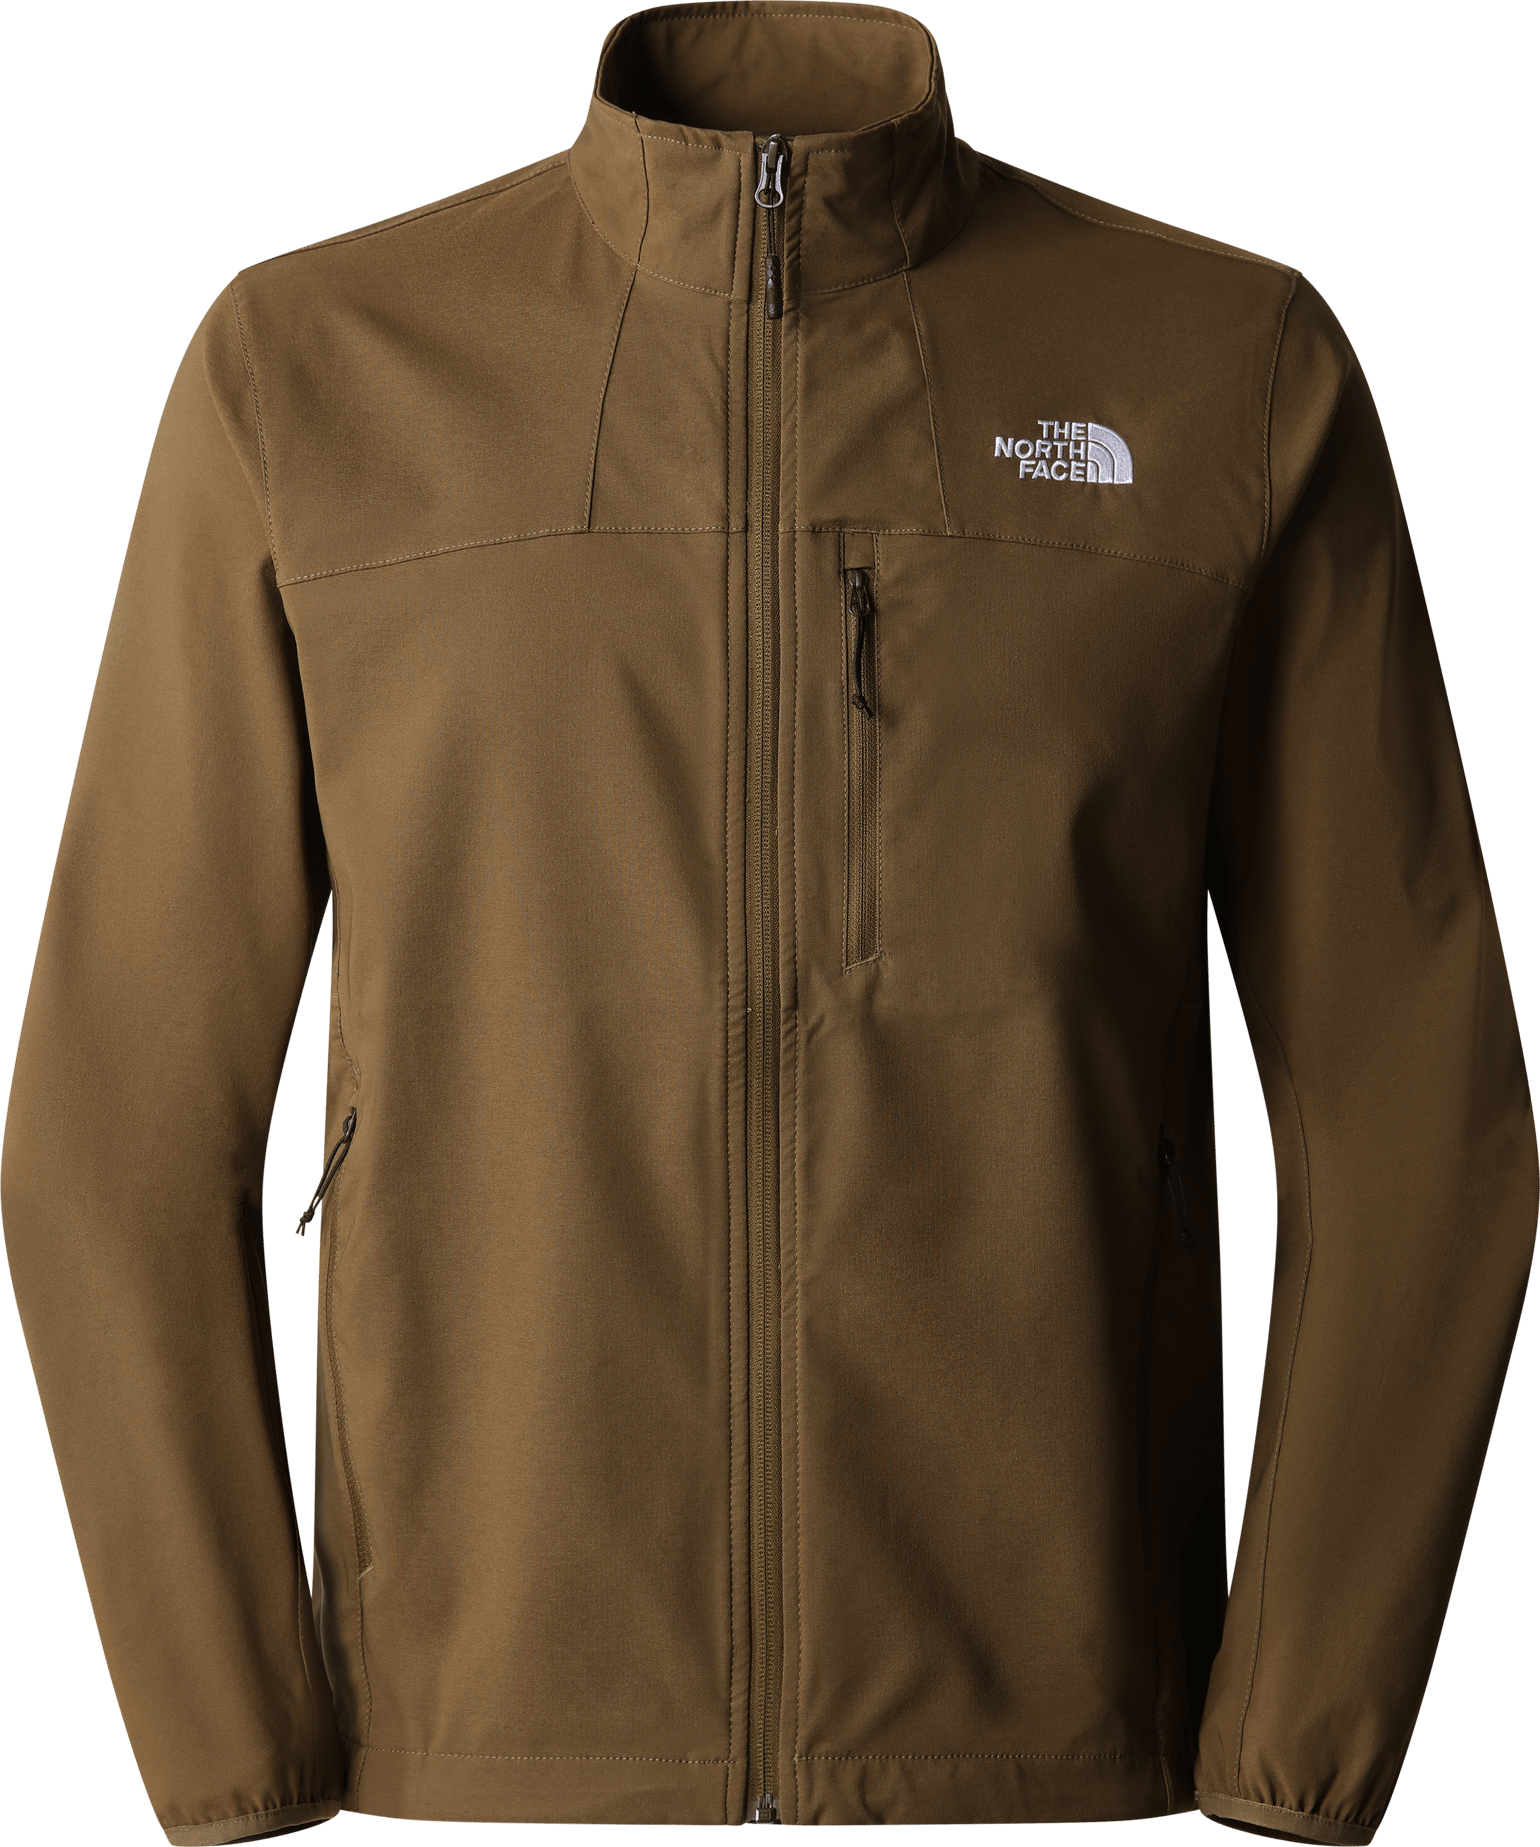 The North Face Men's Nimble Jacket Military Olive